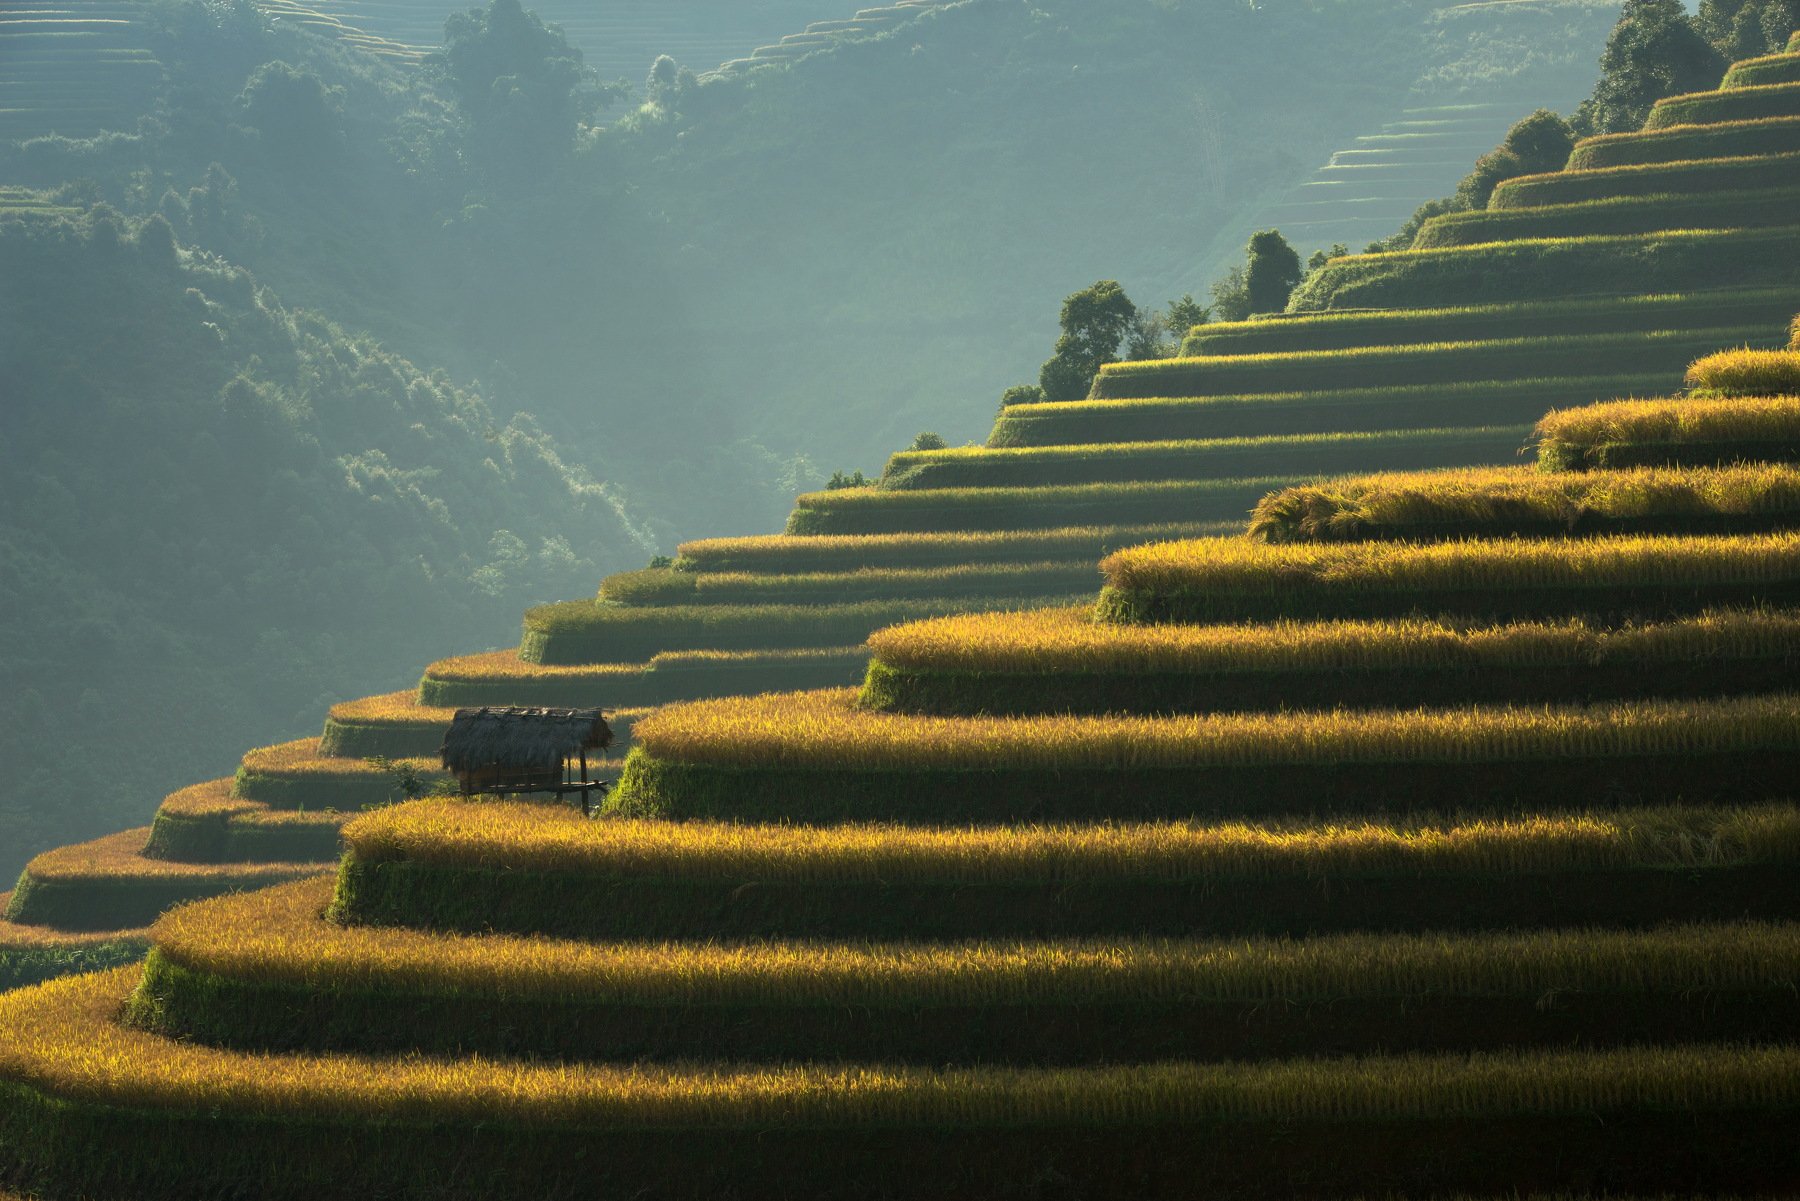 Beauty In Nature, Color Image, Field, Green Color, Horizontal, Land, Layered, Mountain, Nature, No People, Outdoors, Photography, Rice Paddy, Rural Scene, Sunlight, Terraced Field, Tranquil Scene, Vietnam, sarawut intarob